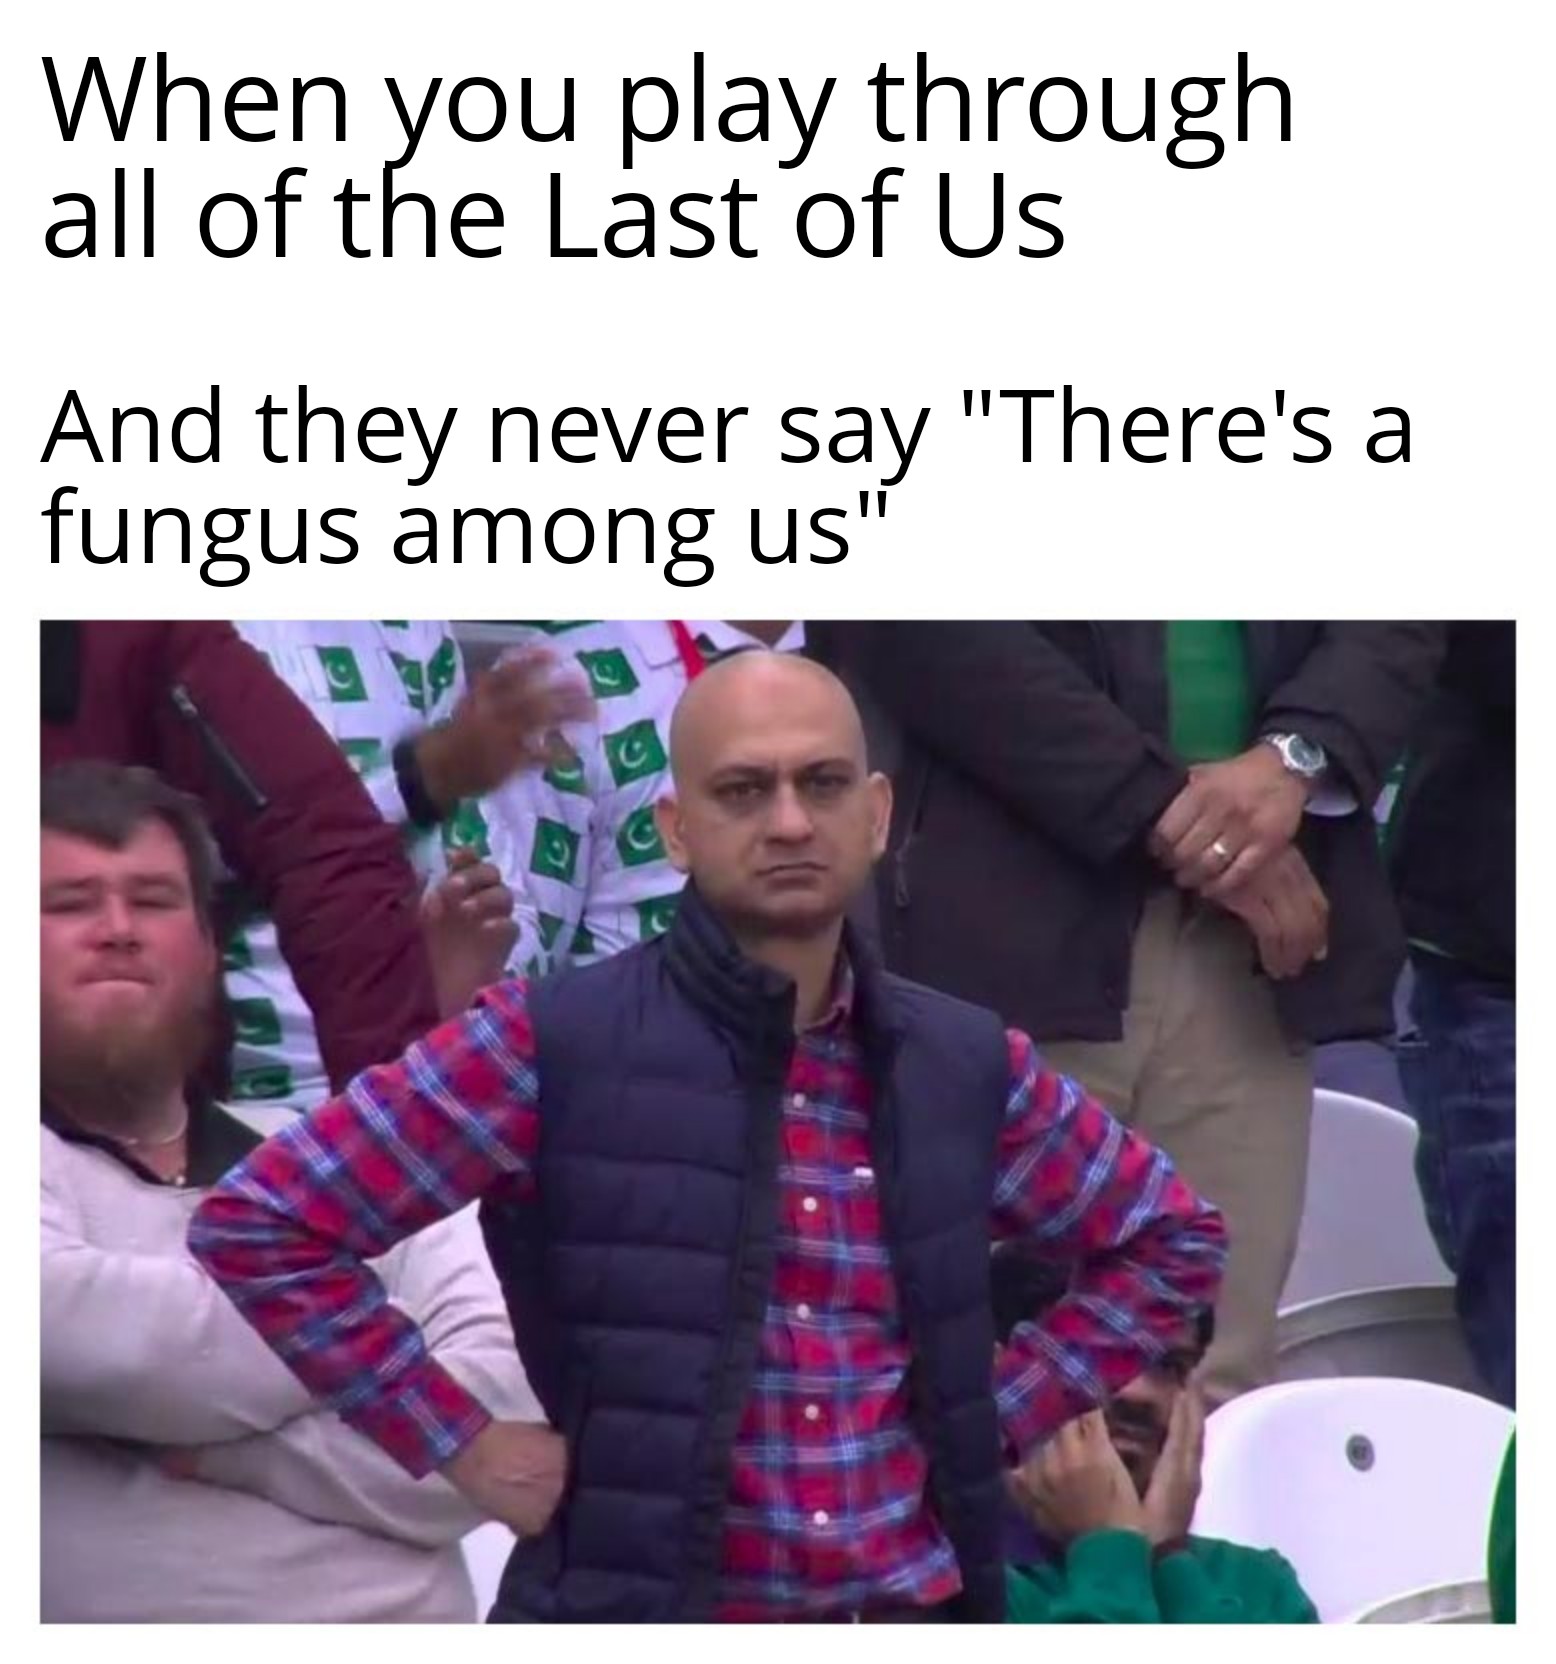 gaming memes for all - quotes - When you play through all of the Last of Us And they never say "There's a fungus among us"